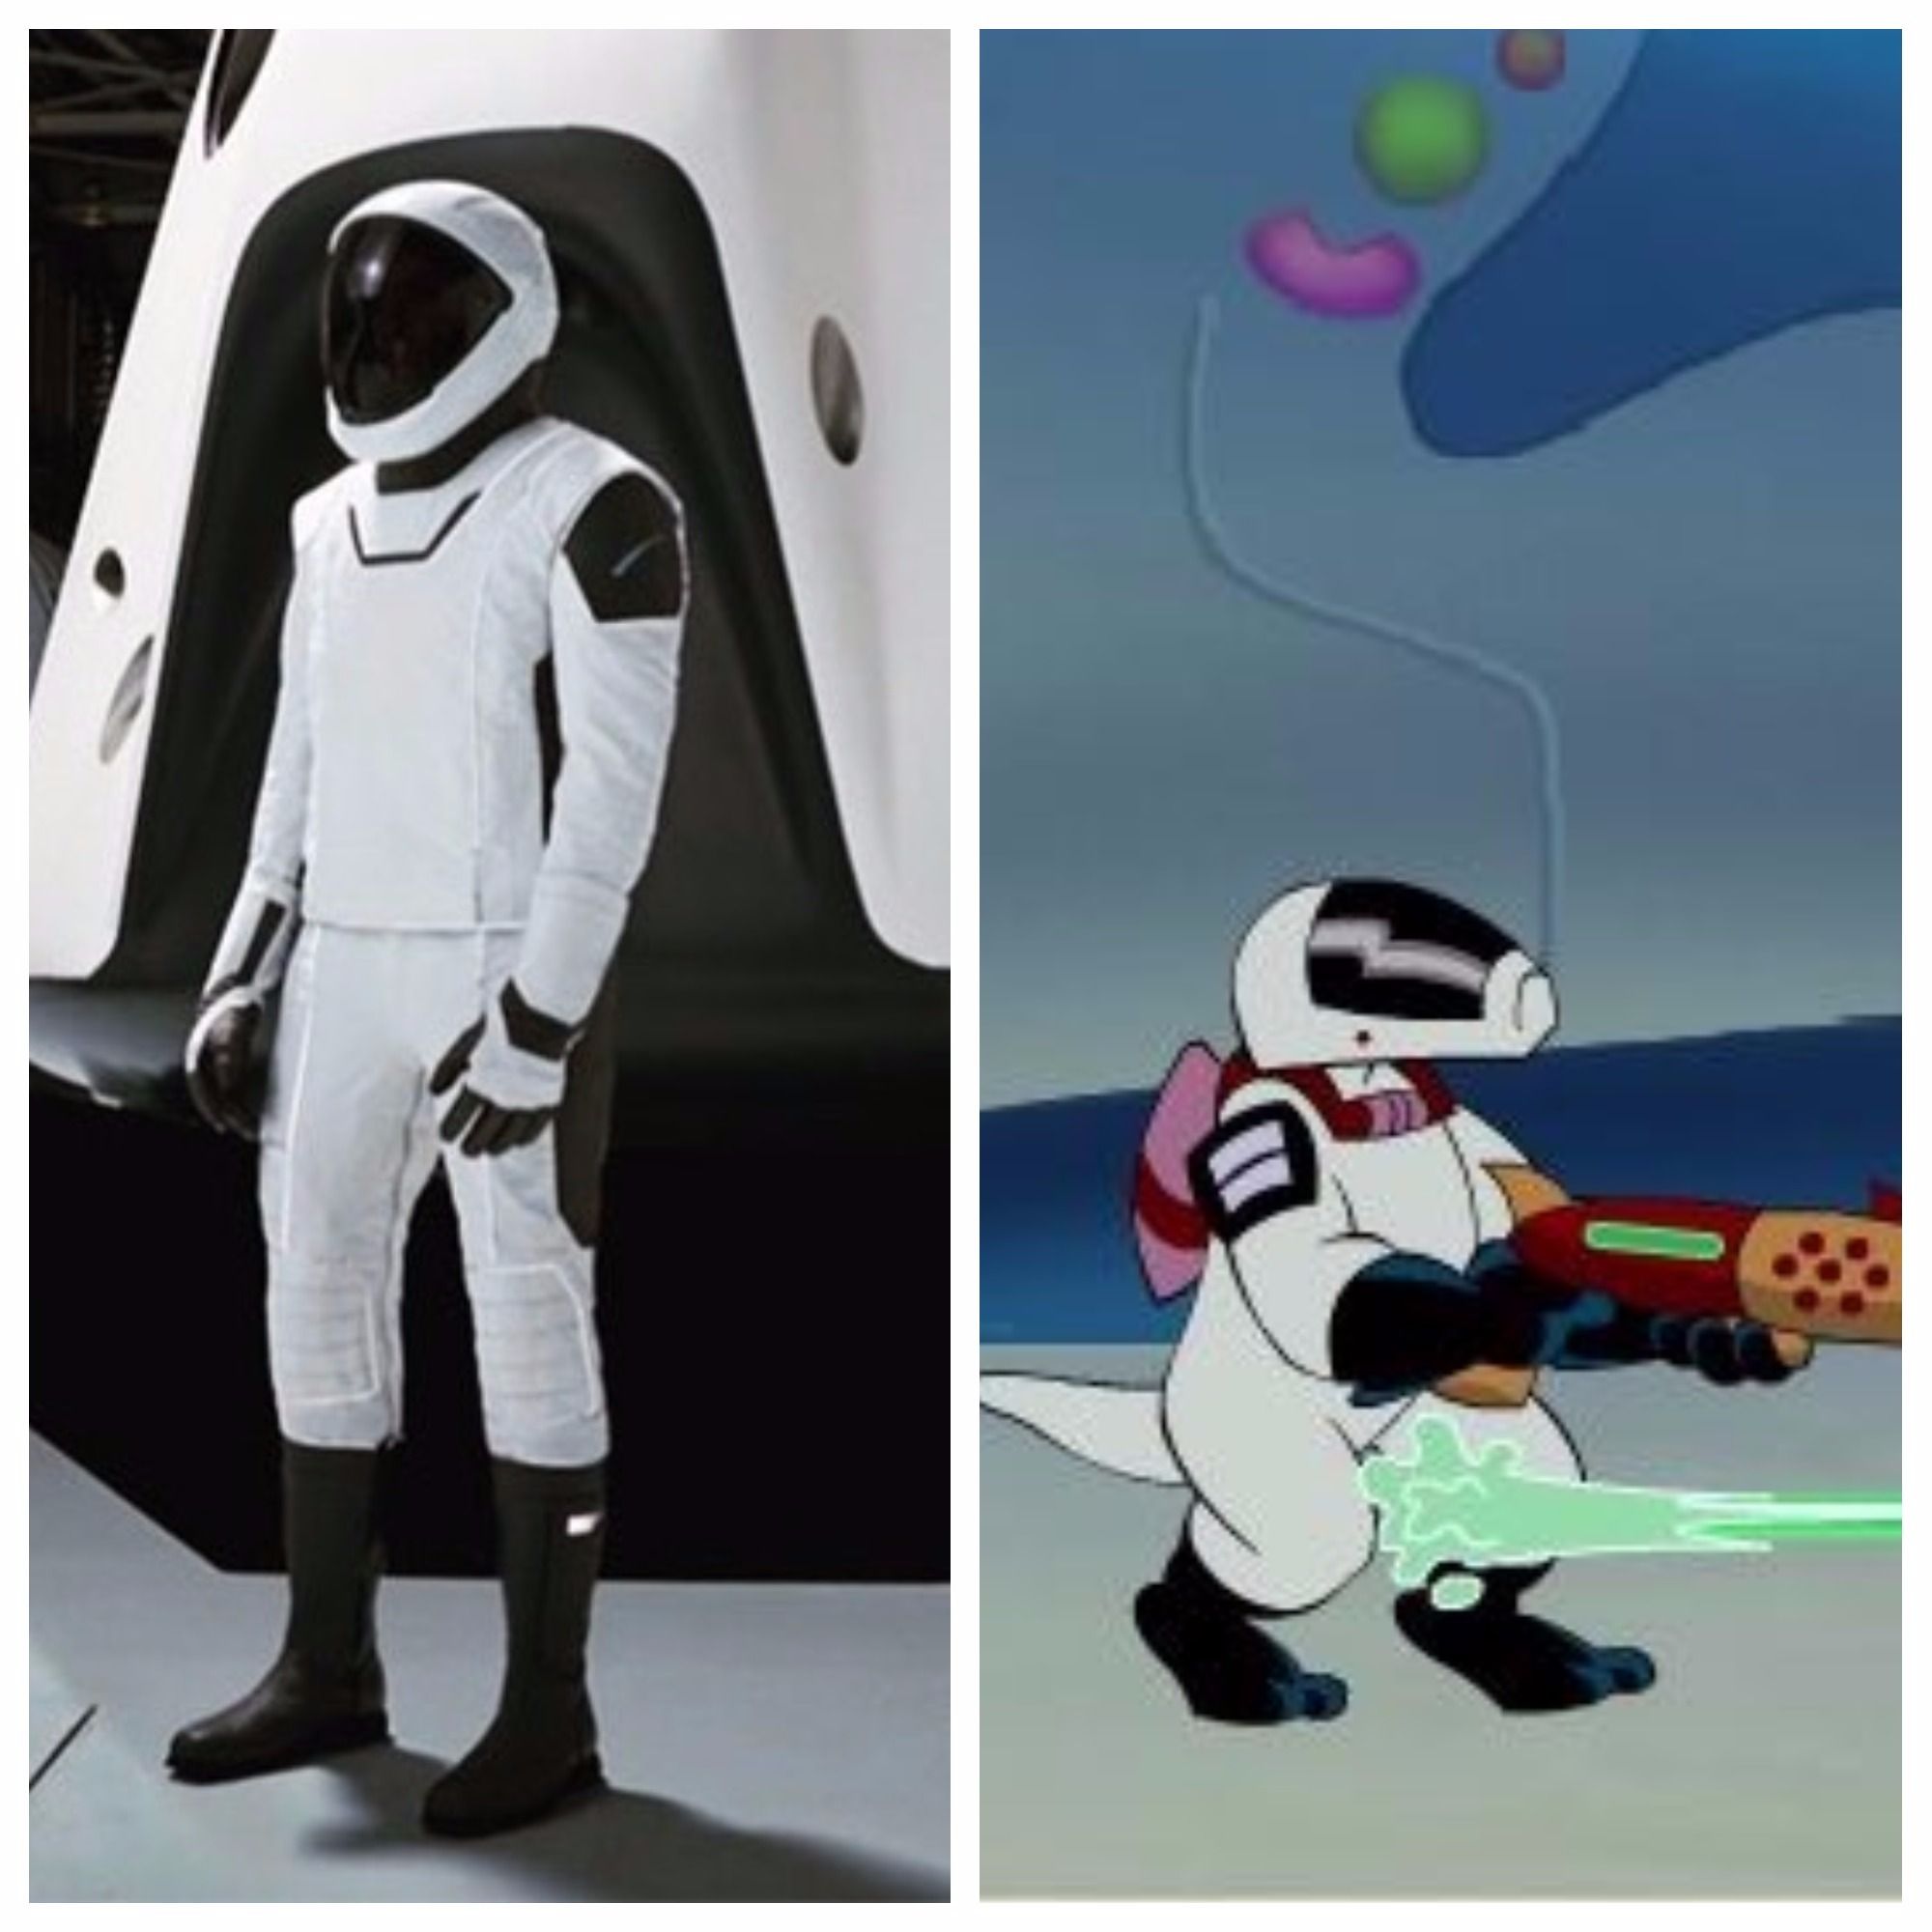 Elon Musk was inspired by Lilo and Stitch for his new SpaceX suit